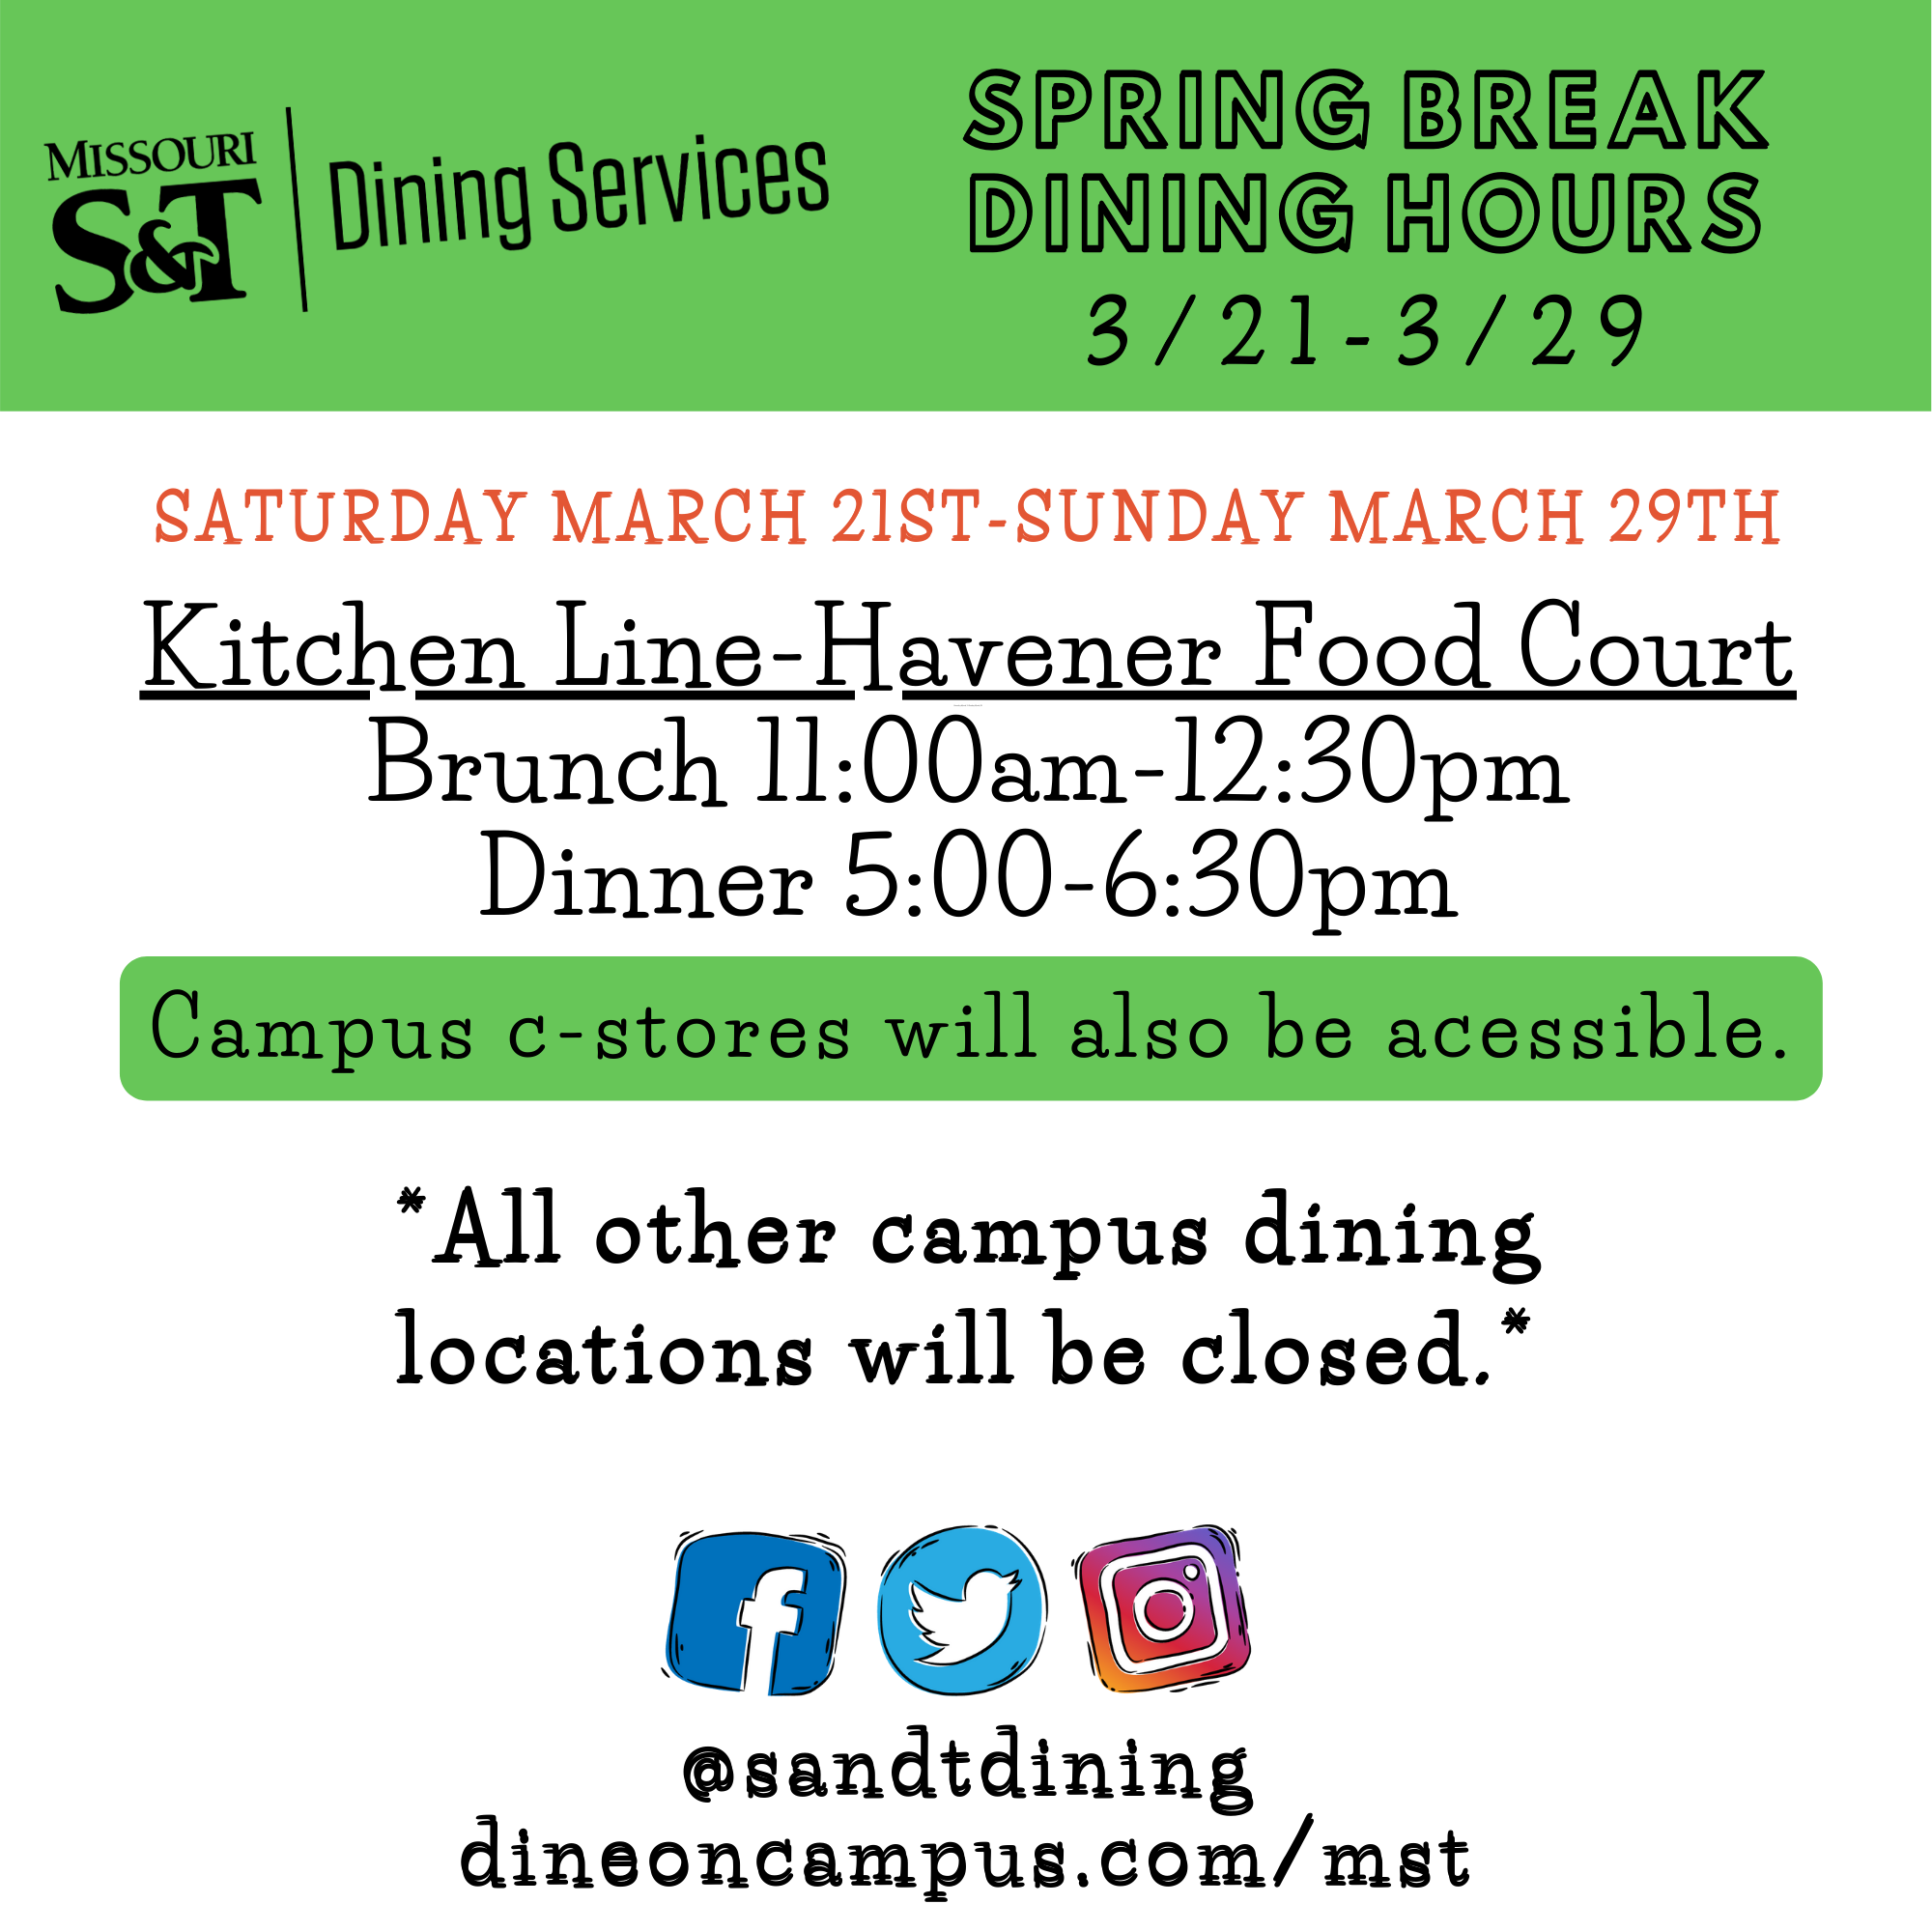 Missouri S&T eConnection Spring Break dining hours